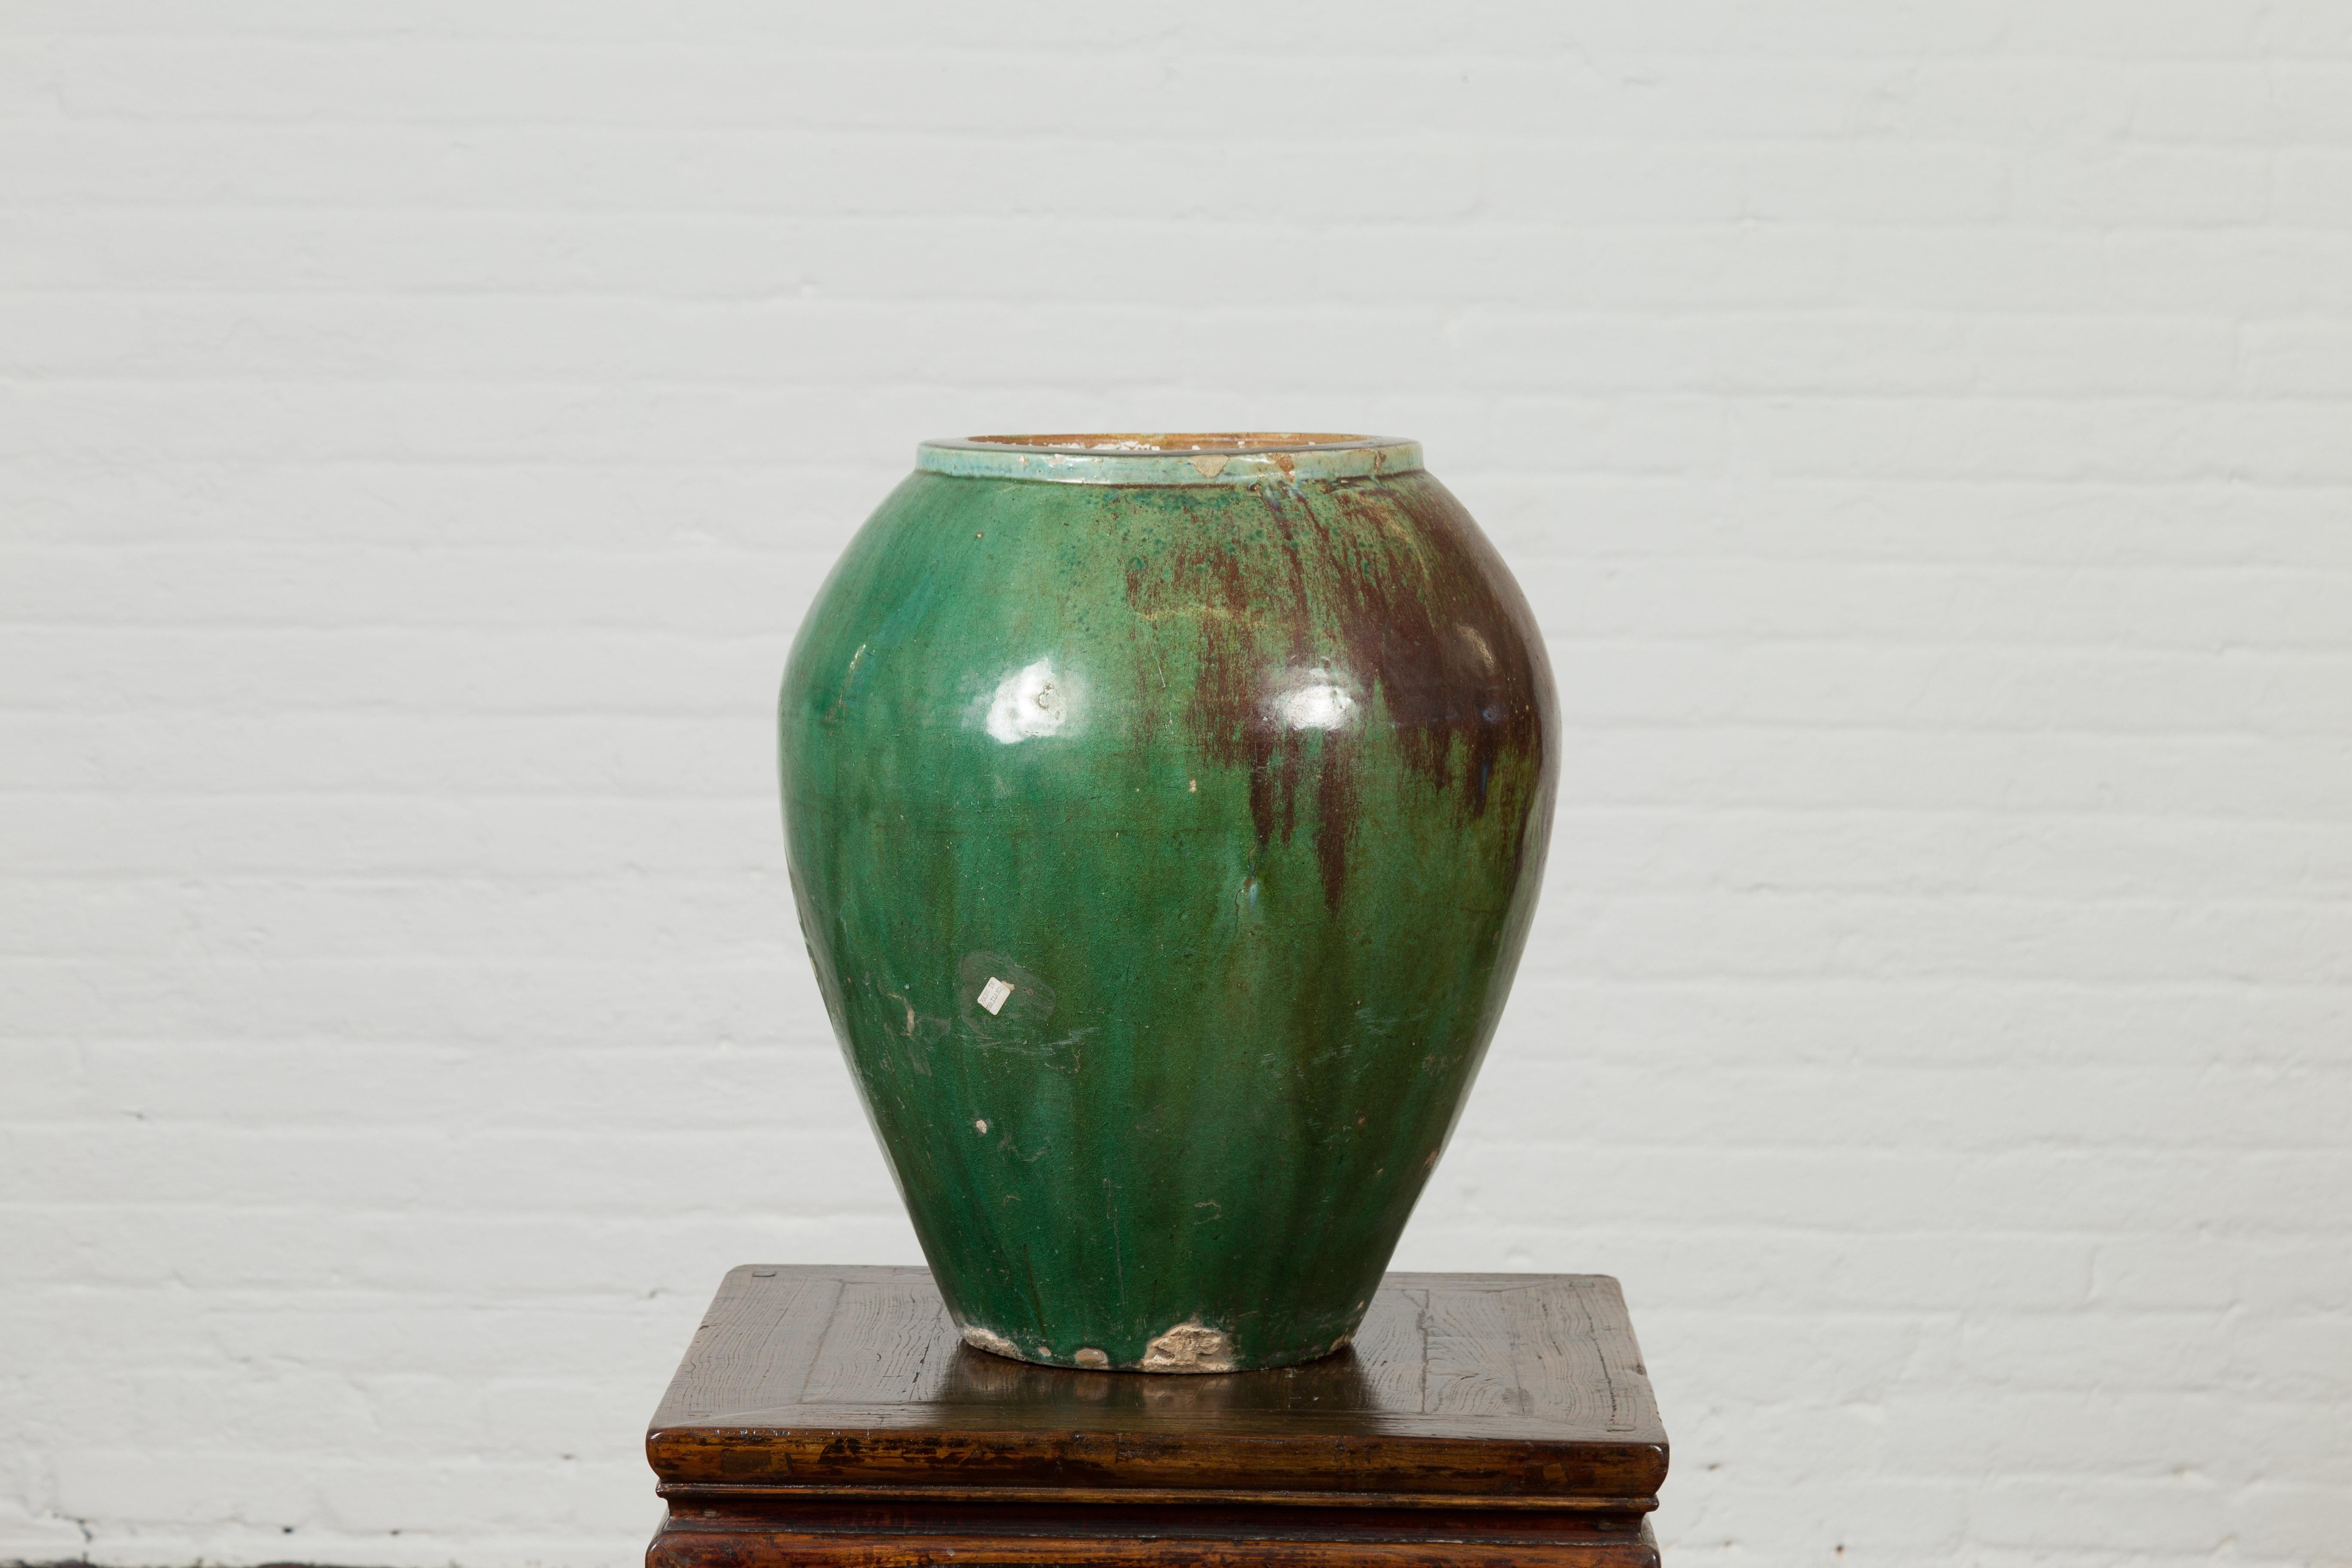 Antique Thai Garden Vase with Distressed Verde Patina and Brown Drip Glaze In Good Condition For Sale In Yonkers, NY